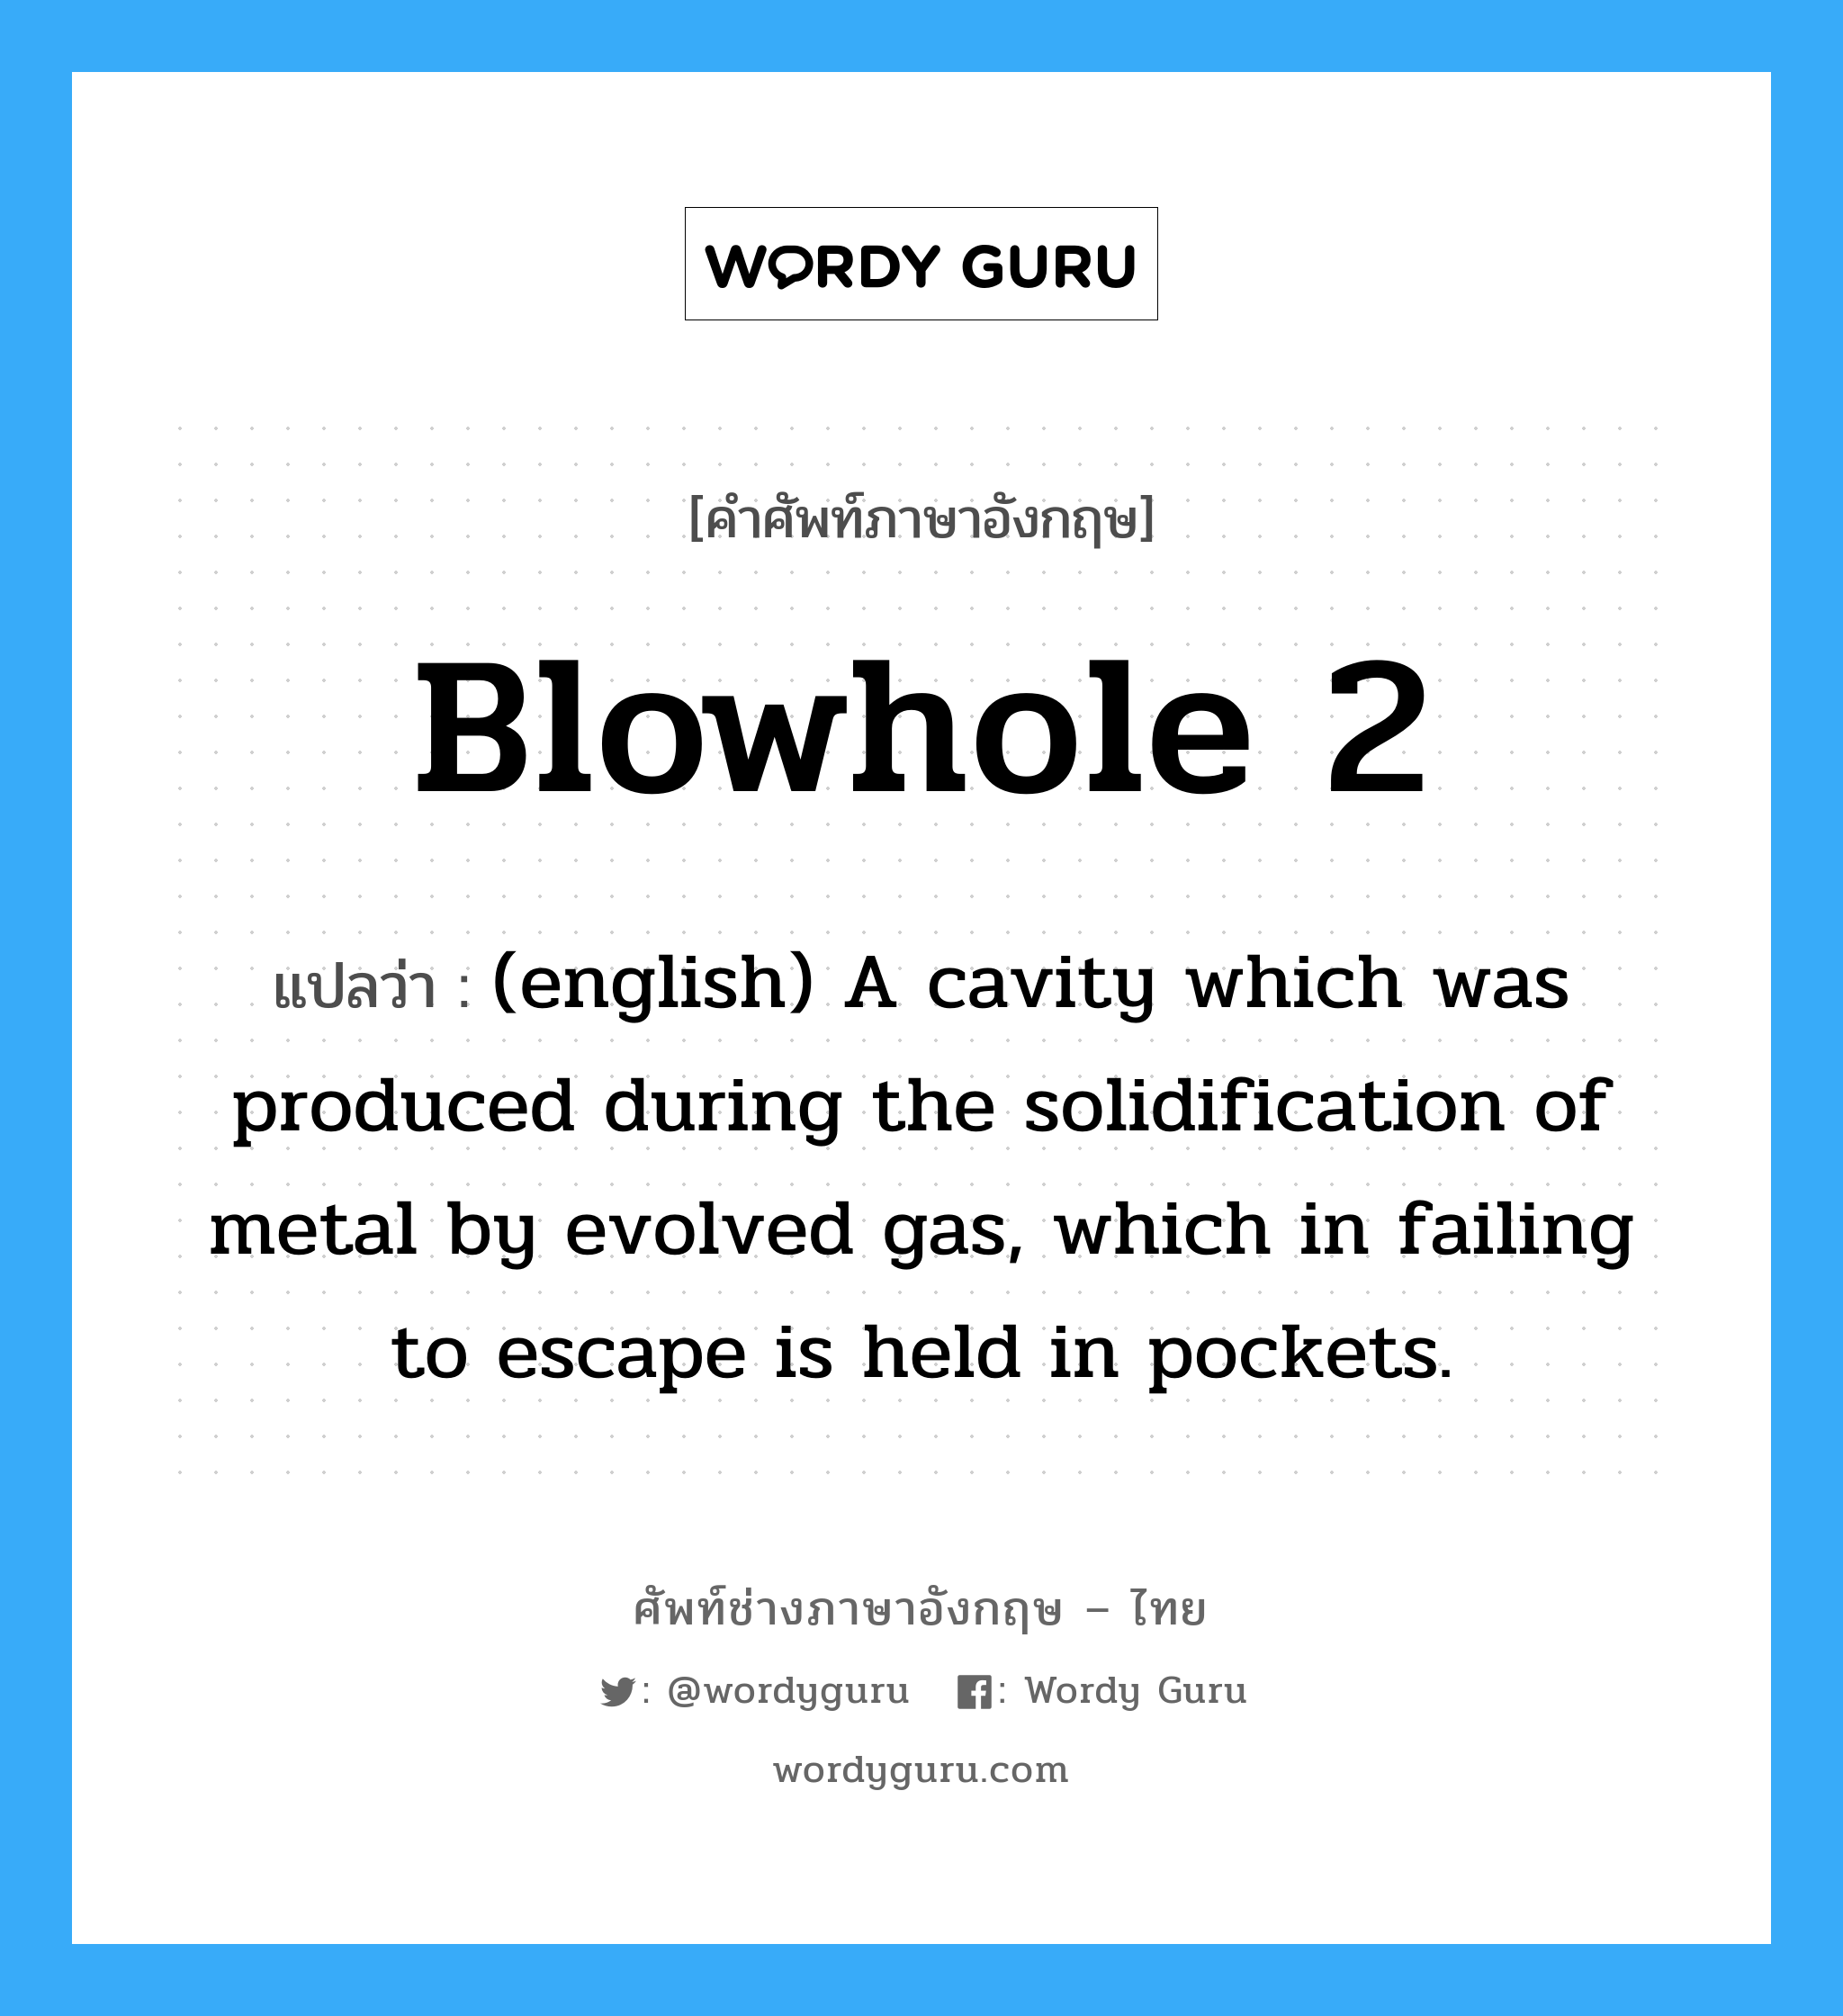 Blowhole 2 แปลว่า?, คำศัพท์ช่างภาษาอังกฤษ - ไทย Blowhole 2 คำศัพท์ภาษาอังกฤษ Blowhole 2 แปลว่า (english) A cavity which was produced during the solidification of metal by evolved gas, which in failing to escape is held in pockets.